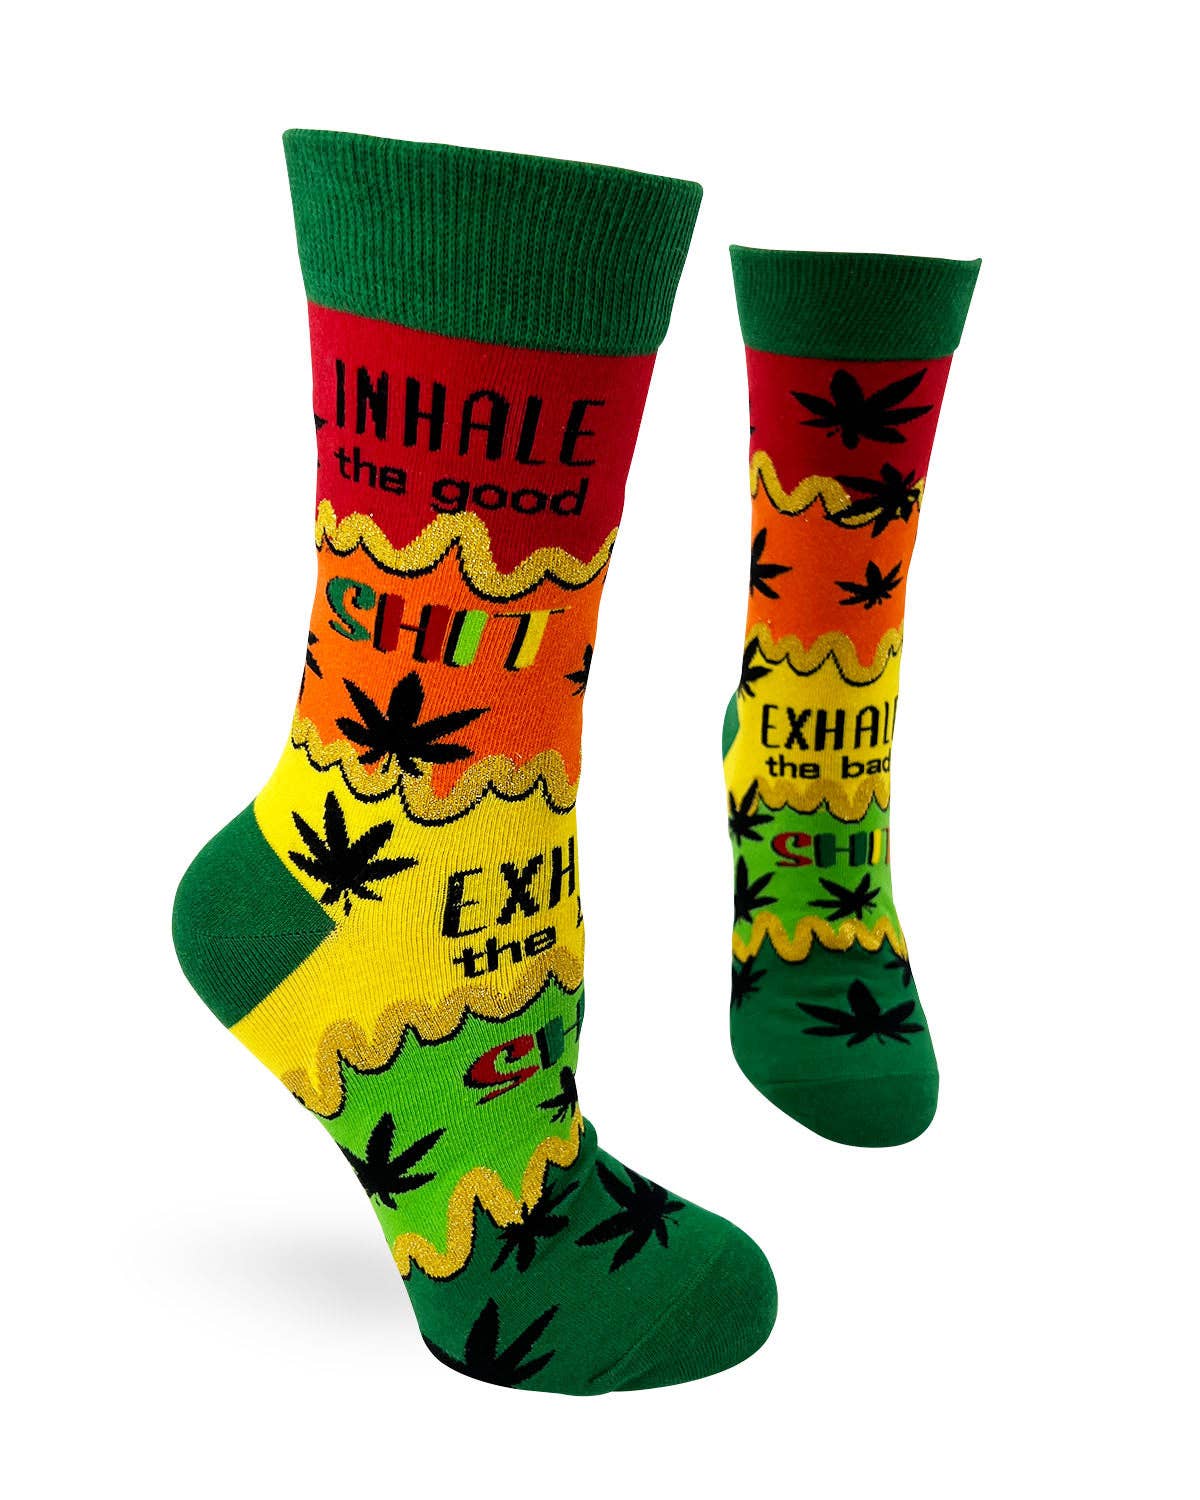 Inhale The Good Shit, Exhale The Bad Shit Women's Weed Socks